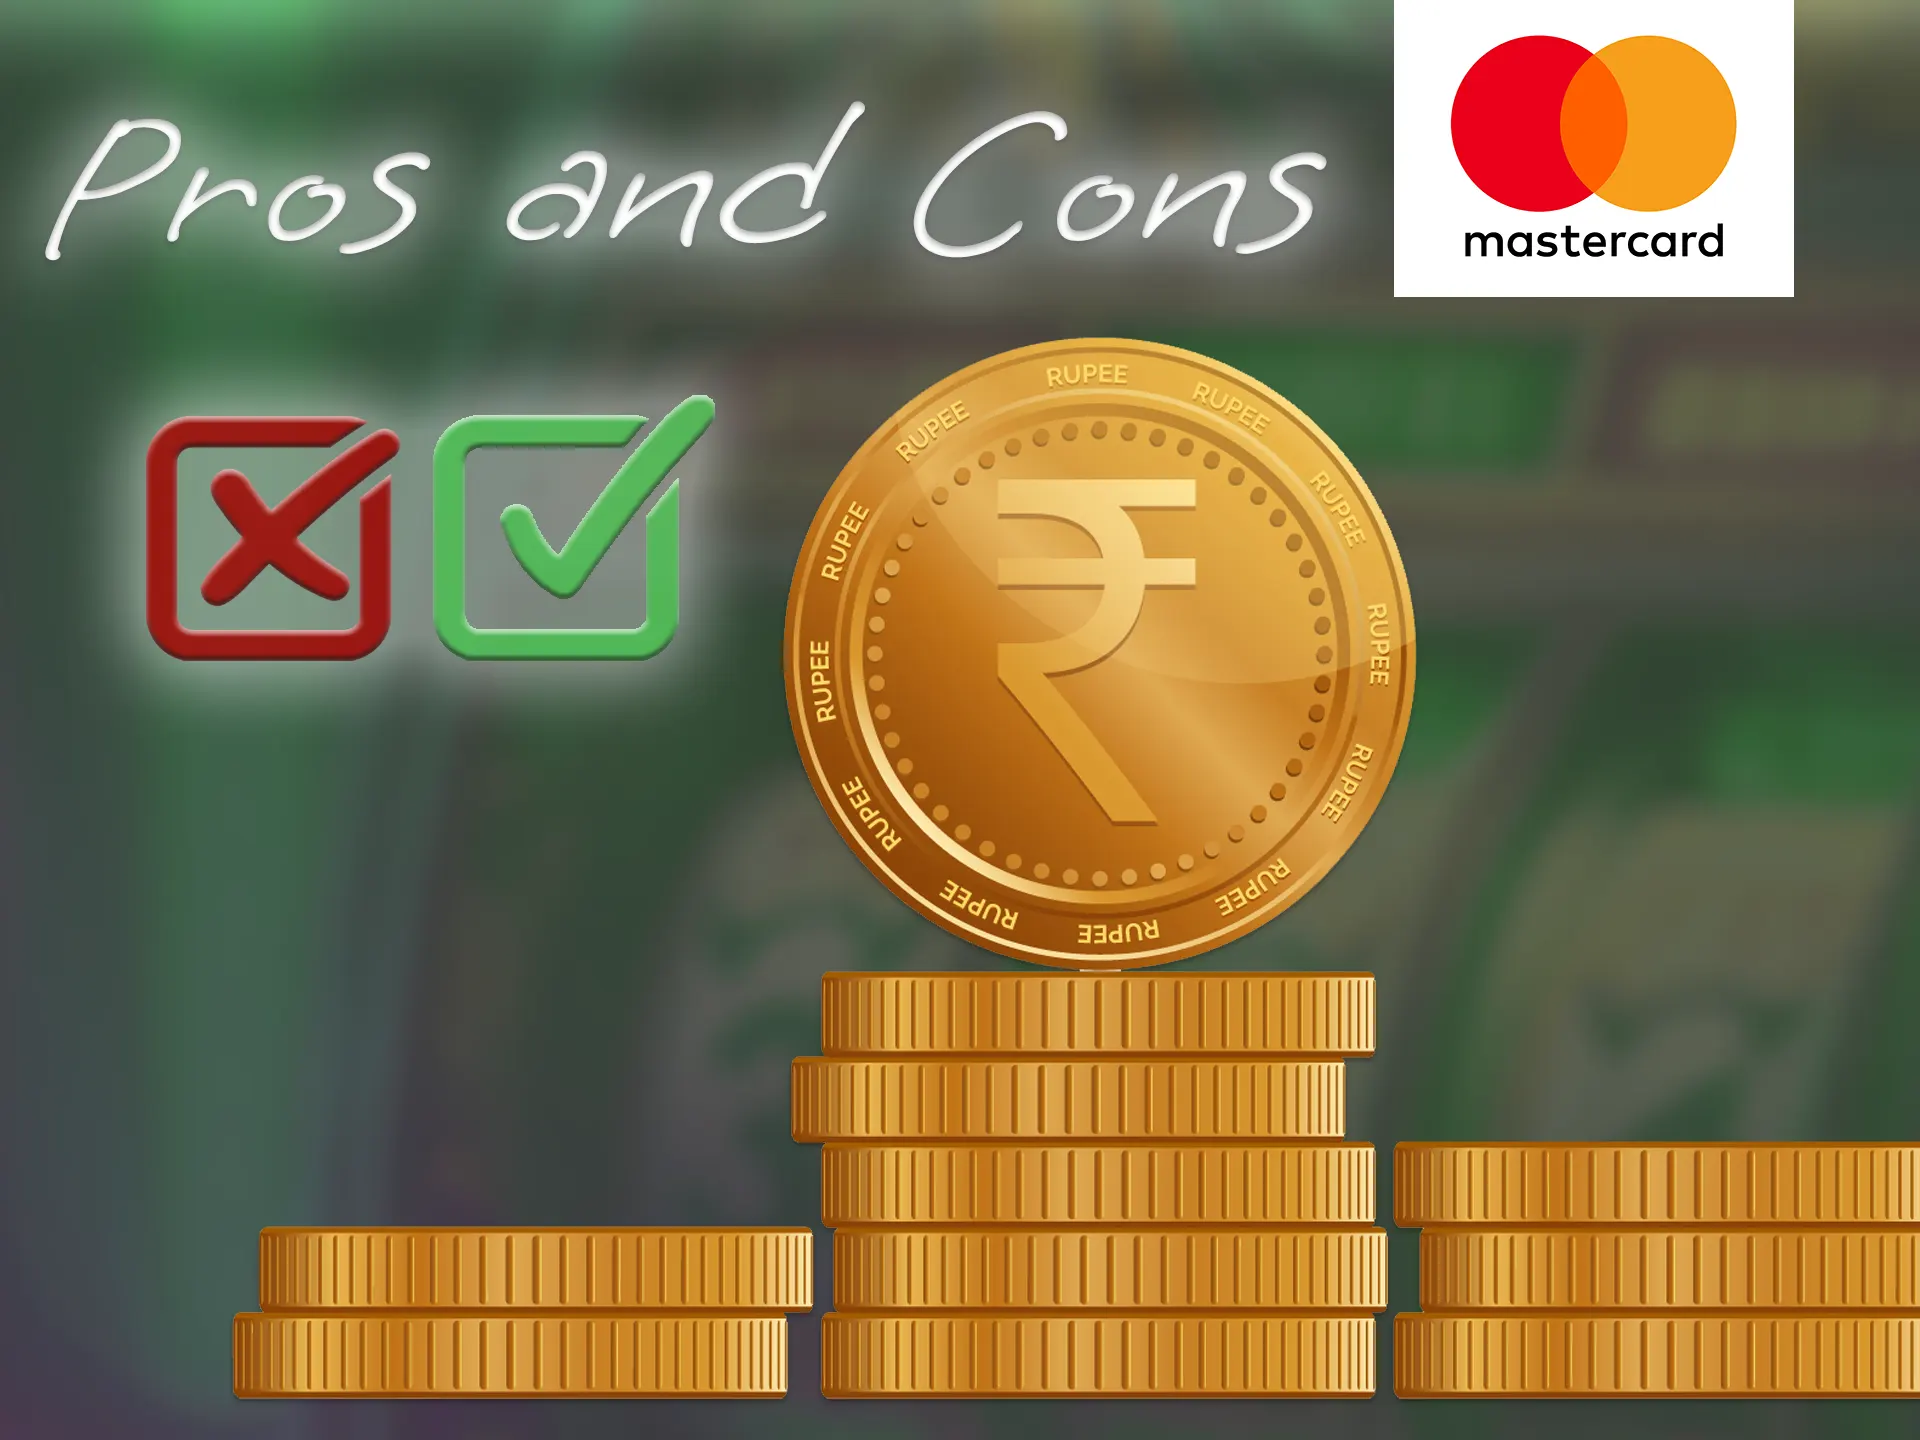 Familiarise yourself with the pros and cons of the Mastercard payment system.